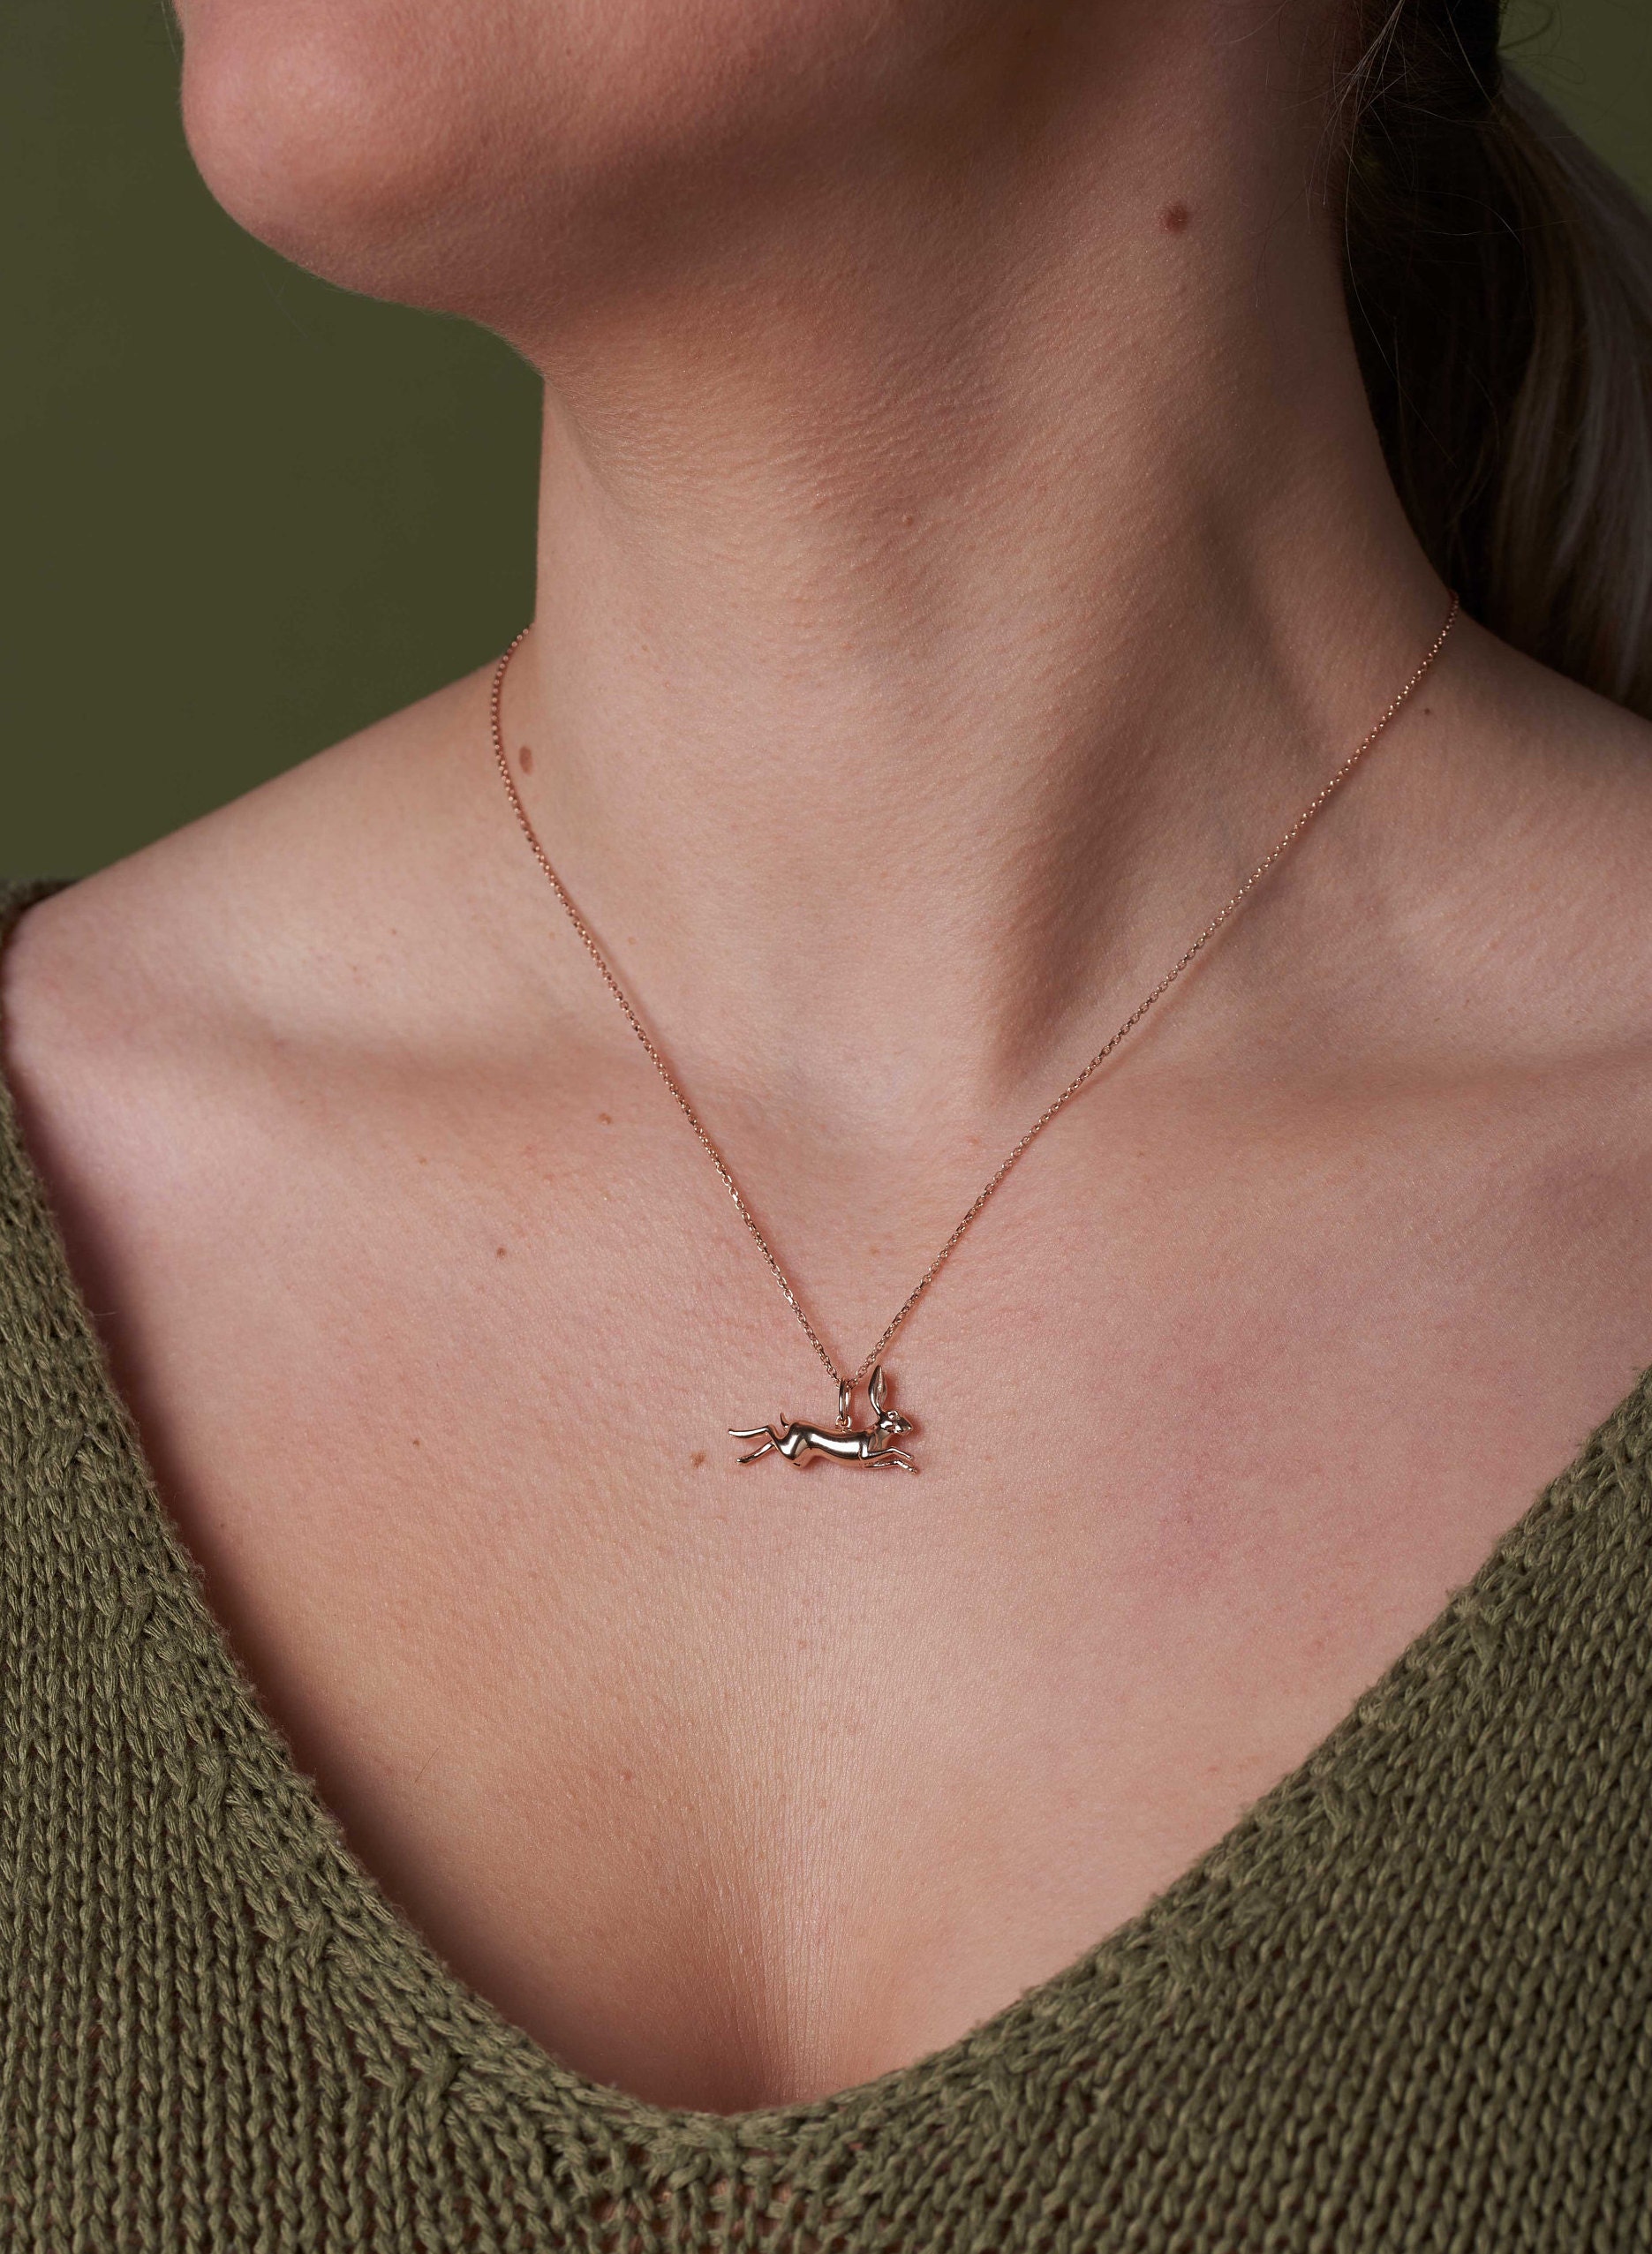 18k vermeil unusual nature inspired jewellery gift for a magical friend Sterling silver Running hare pendant necklace gold rose gold